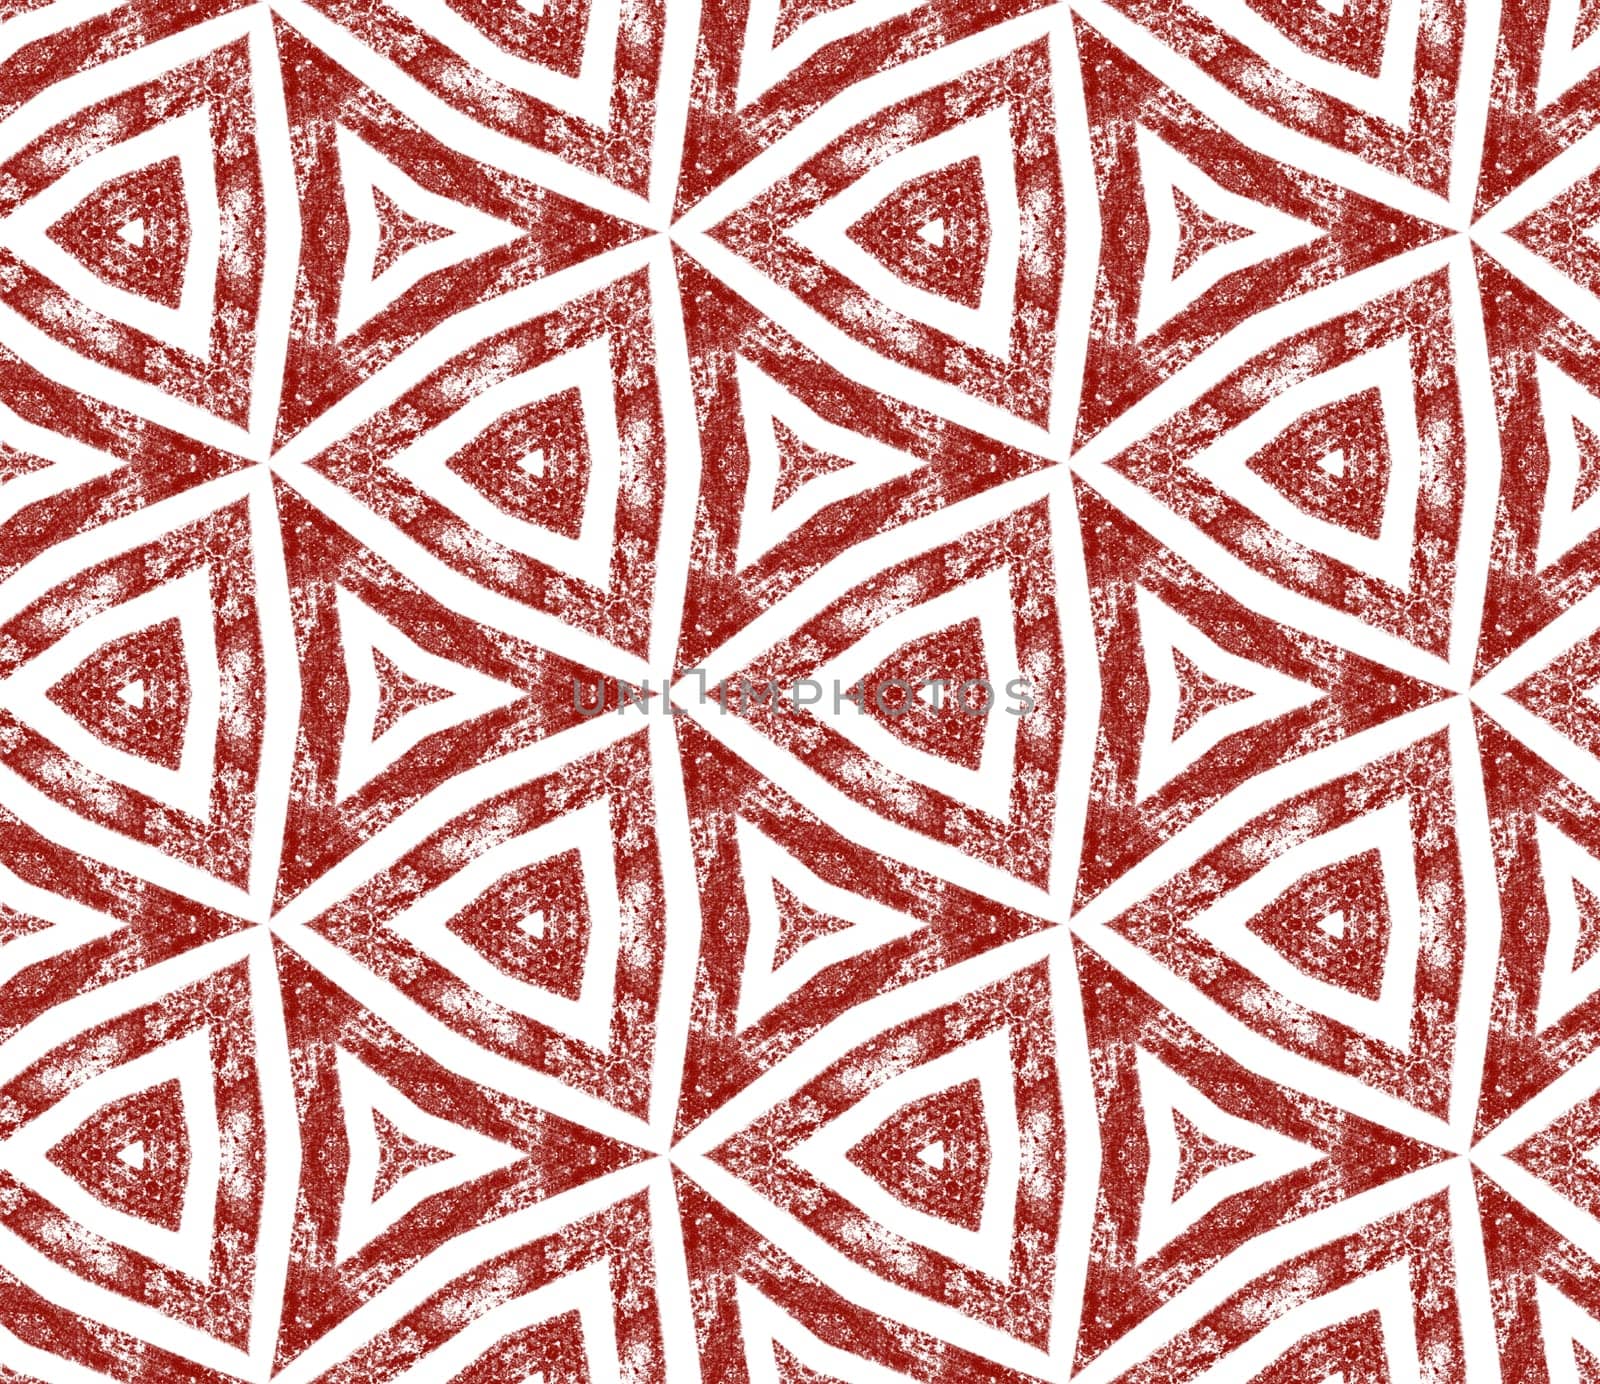 Ethnic hand painted pattern. Wine red symmetrical kaleidoscope background. Textile ready fantastic print, swimwear fabric, wallpaper, wrapping. Summer dress ethnic hand painted tile.